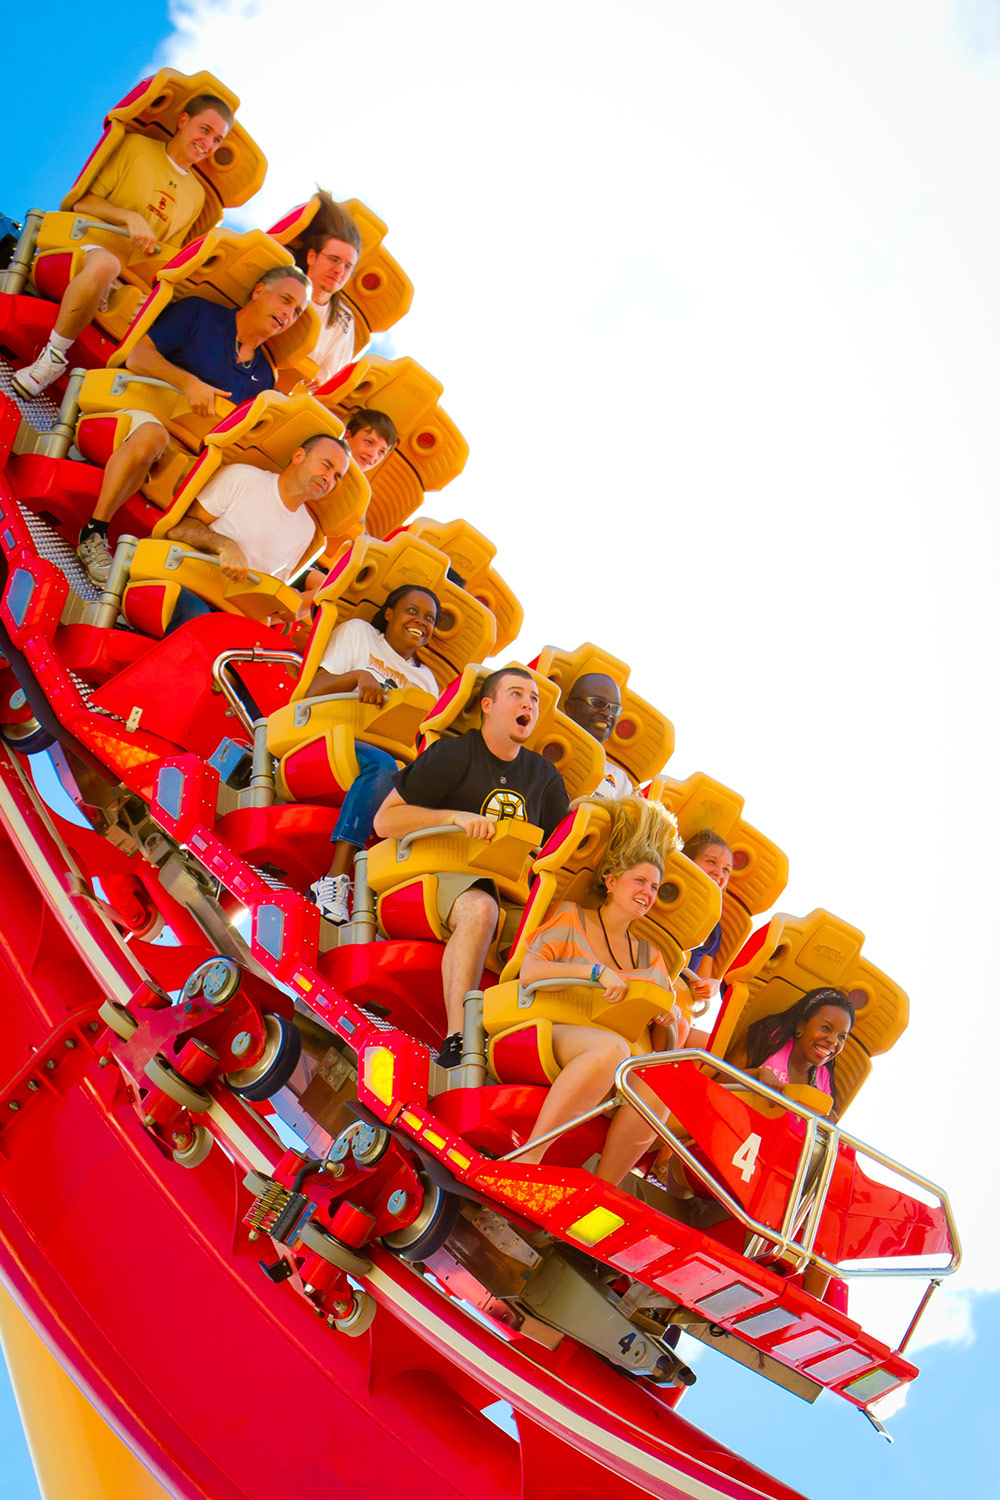 Create your own music video on Hollywood Rip Ride Rockit at Universal Orlando Resort